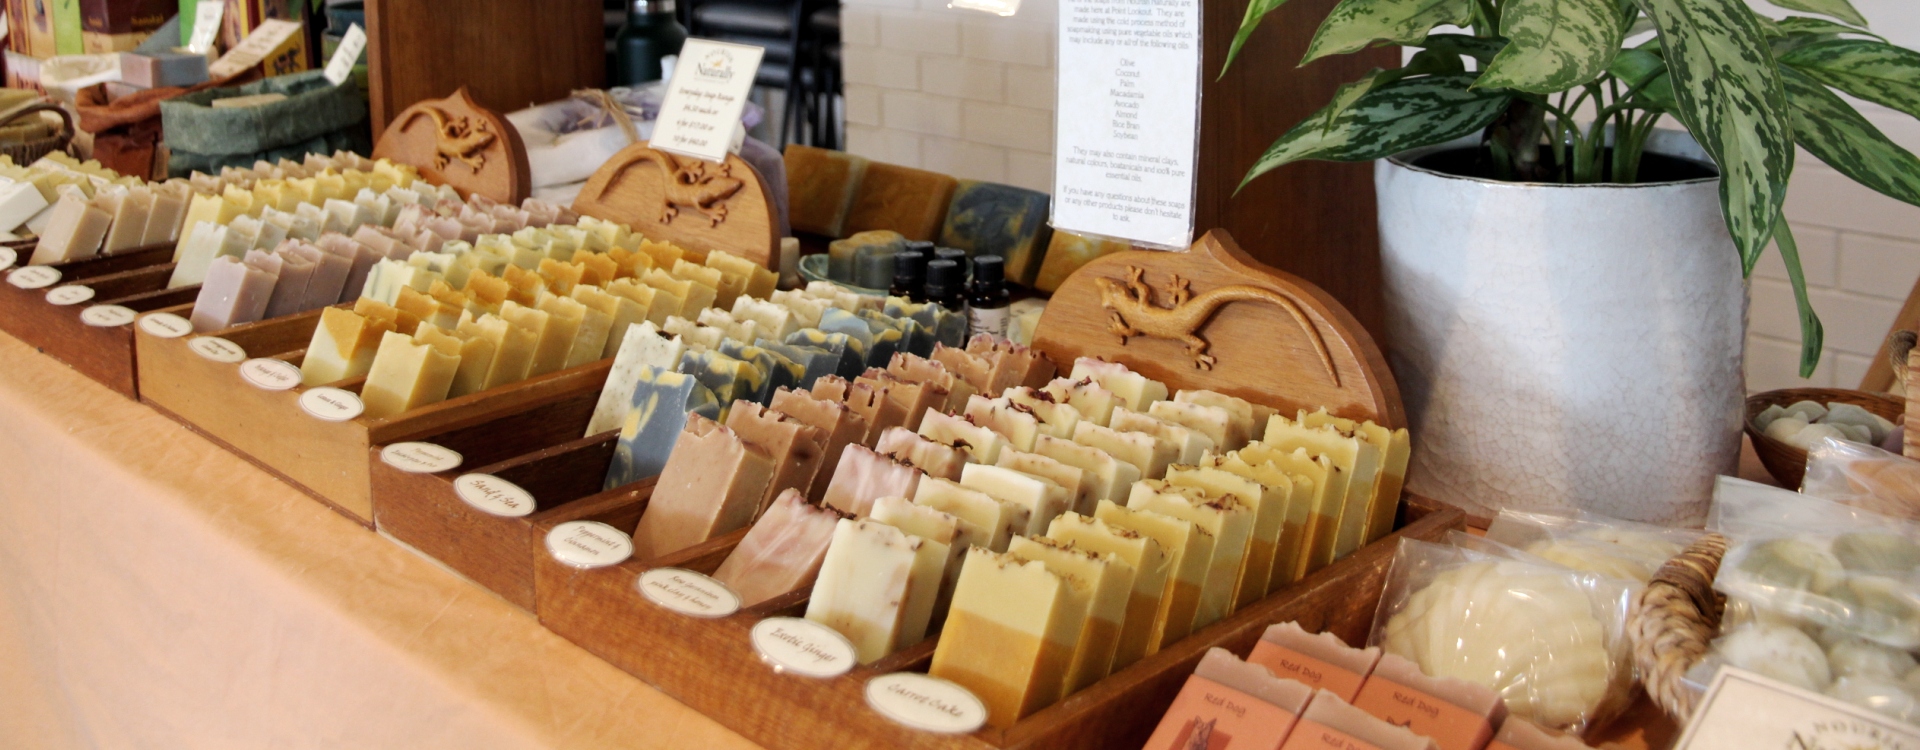 Nourish Naturally essential oil soap Point Lookout markets